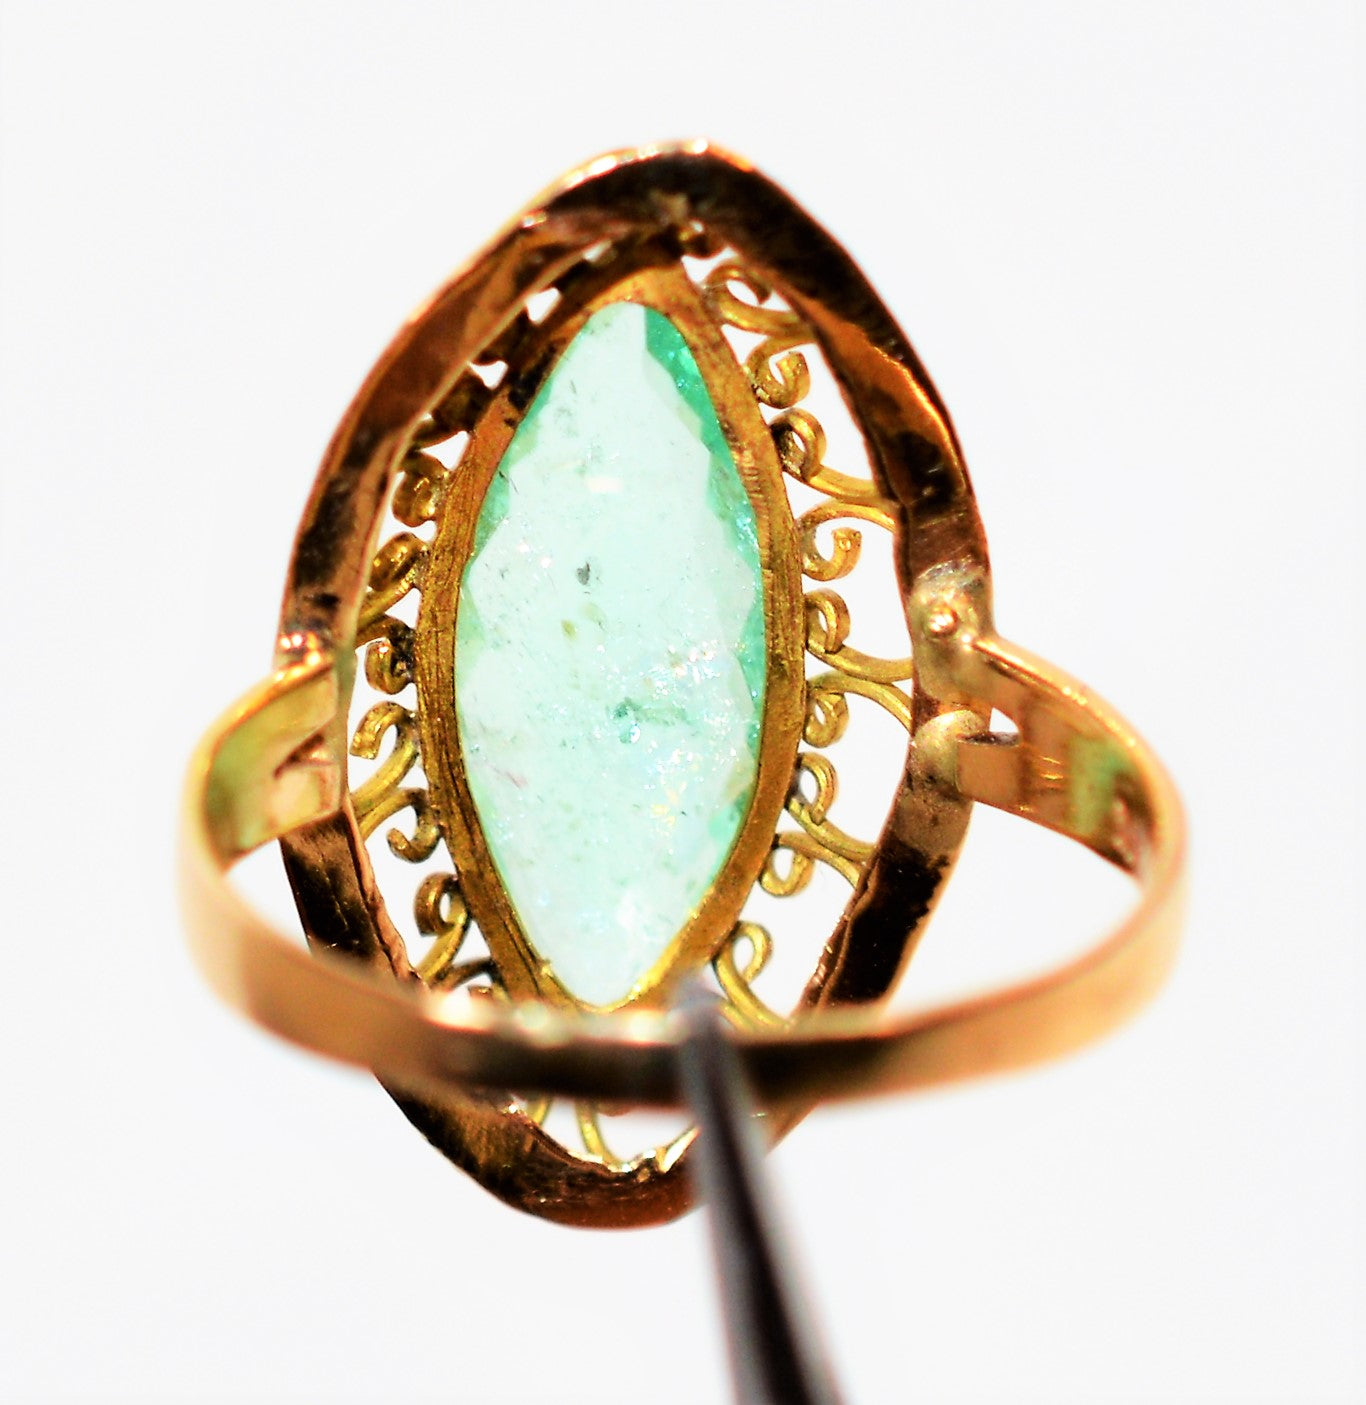 Natural Paraiba Tourmaline Ring 14K Solid Gold 3ct Art Deco Ring Solitaire Ring Women's Ring Cocktail Ring Birthstone Ring Vintage Jewelry